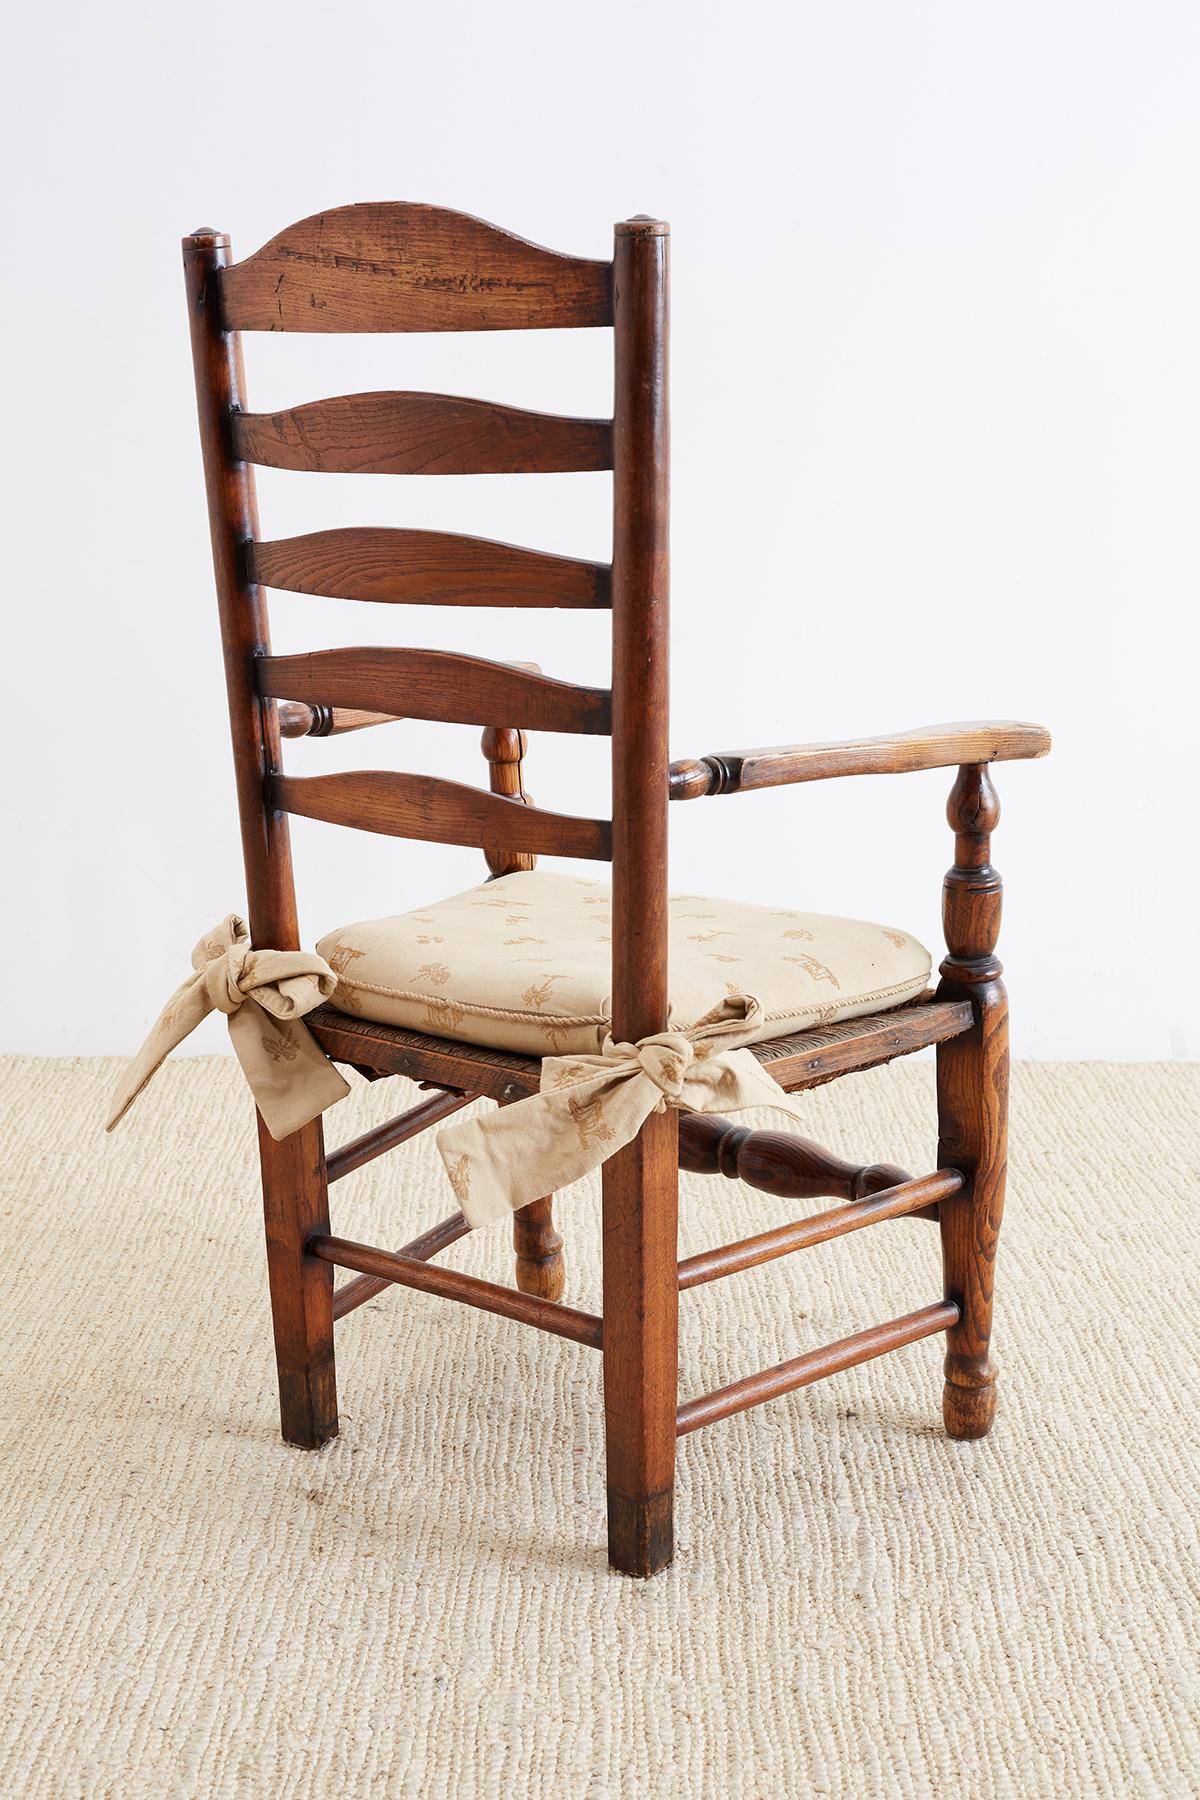 Hand-Woven 19th Century English Ladder Back Chair For Sale